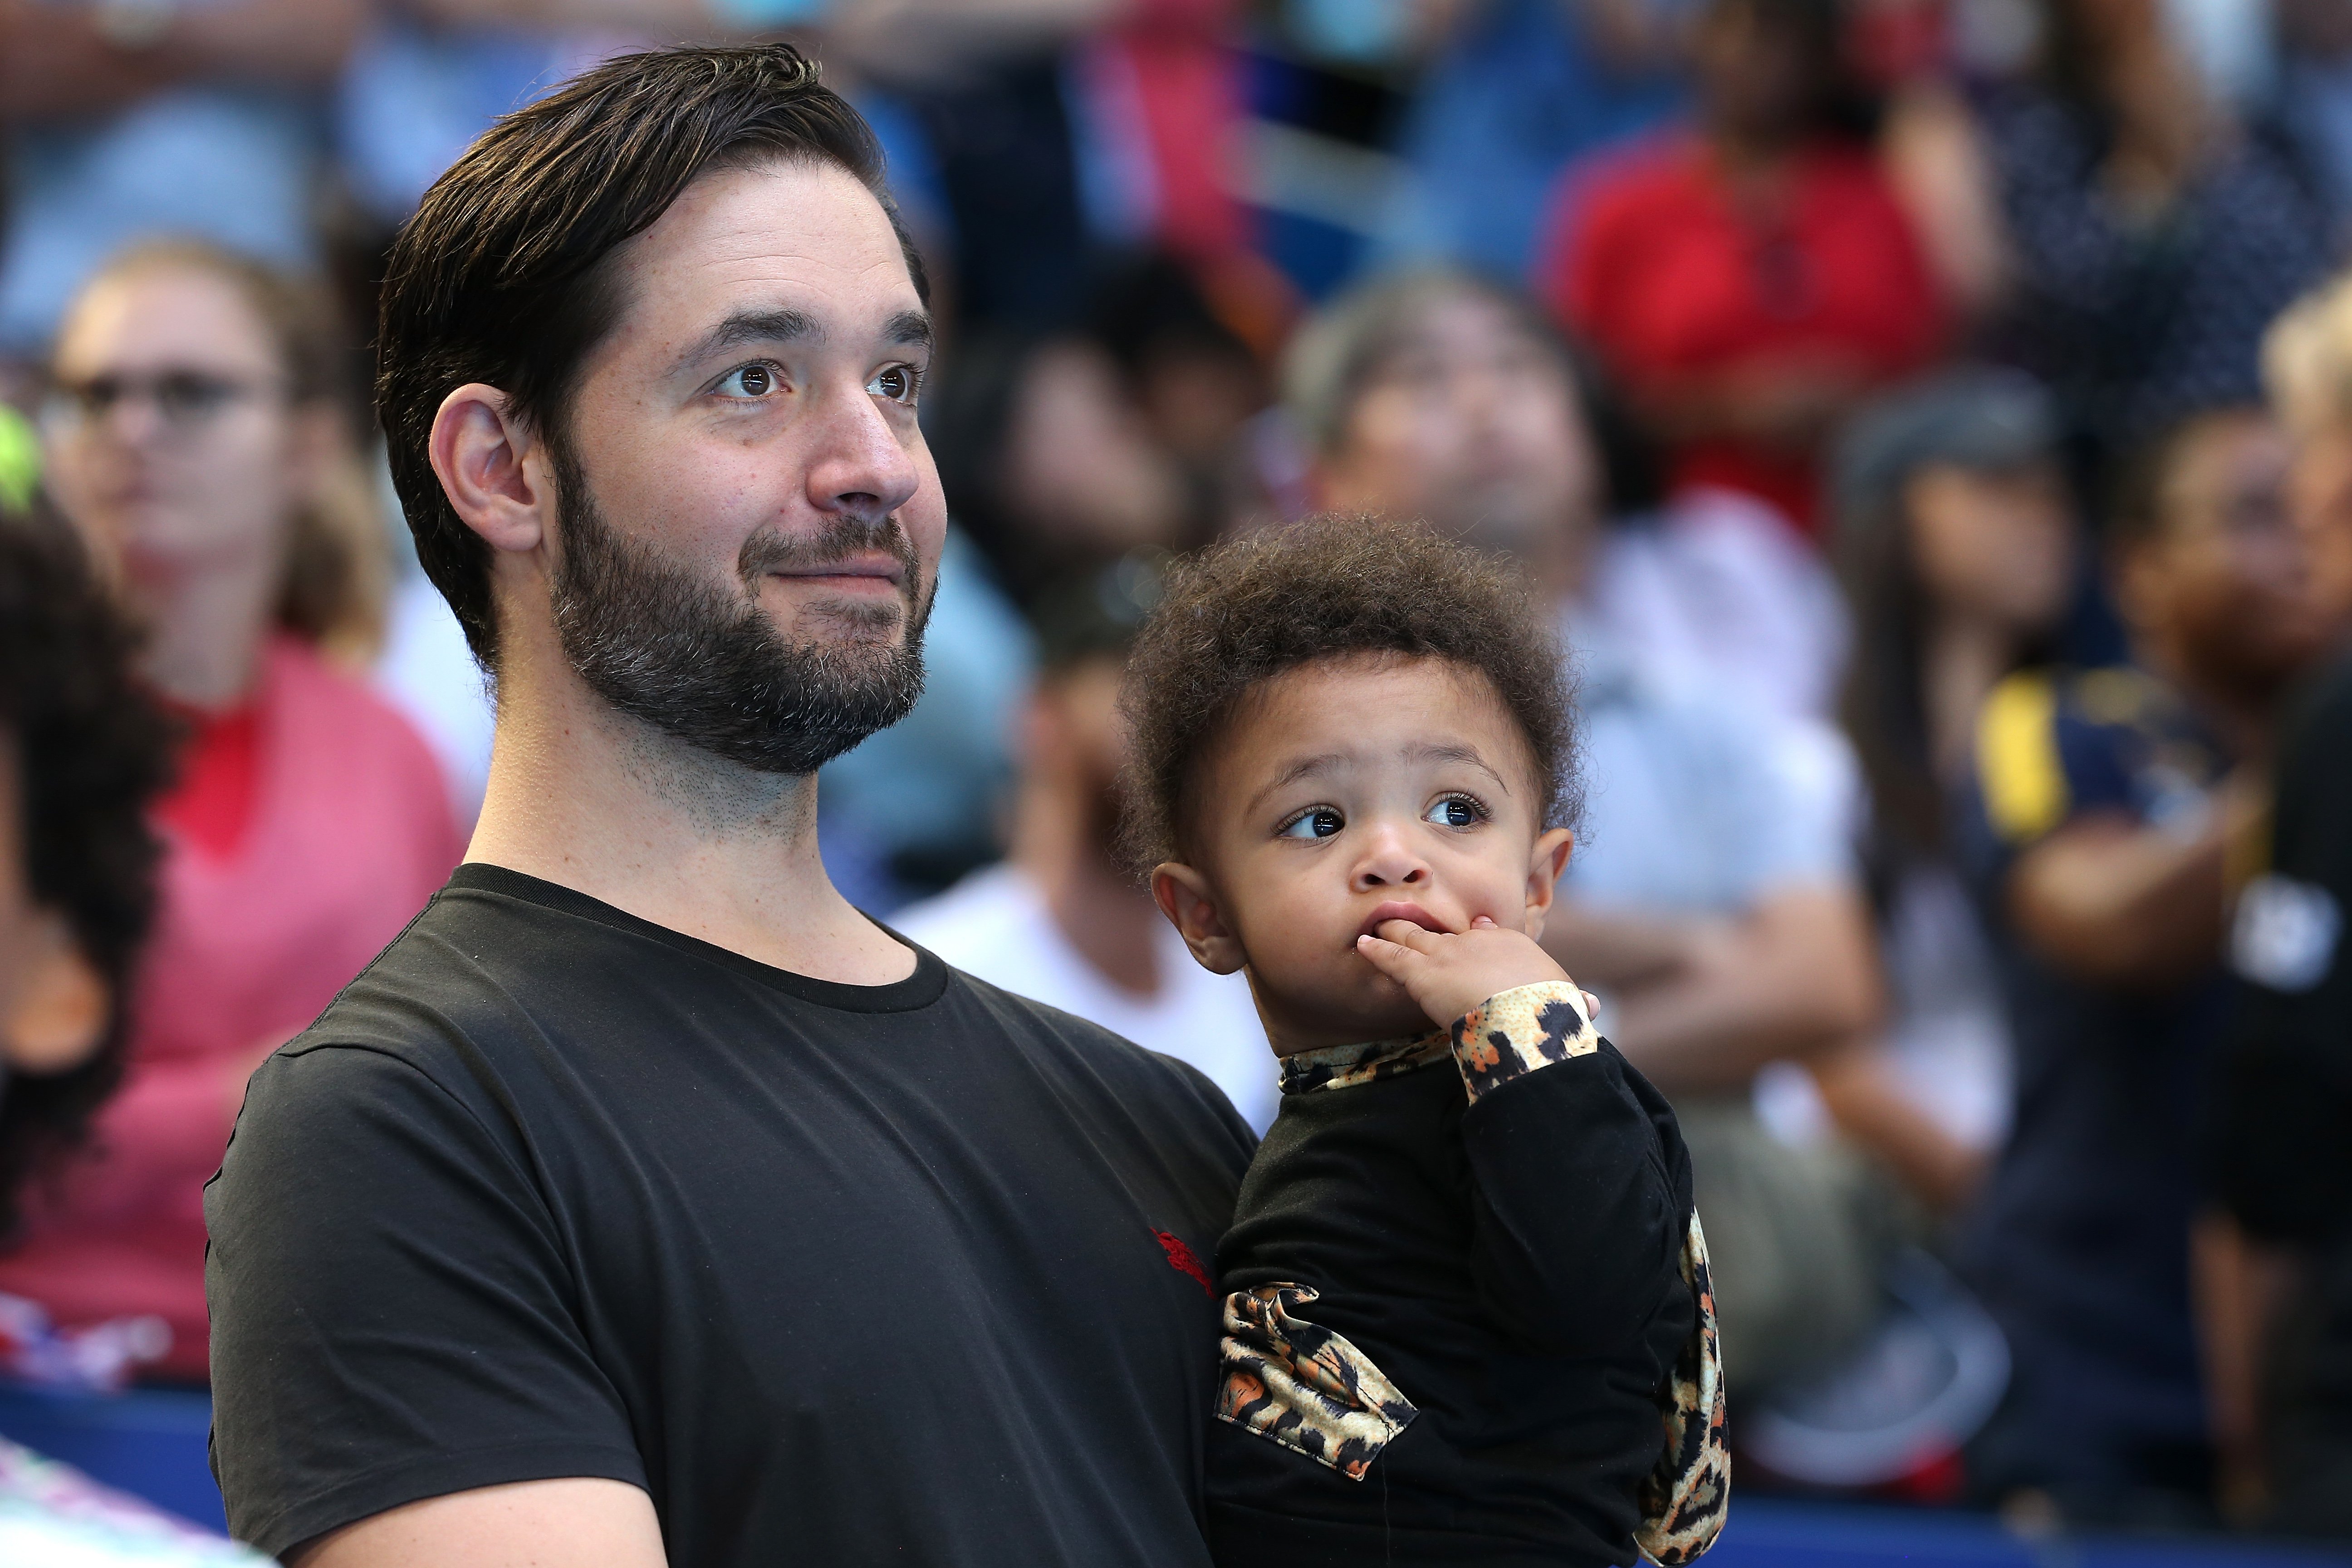 Alexis Ohanian & Olympia Ohanian watch Serena Williams during the 2019 Hopman Cup on Janu. 03, 2019 in Perth, Australia | Photo: Getty Images